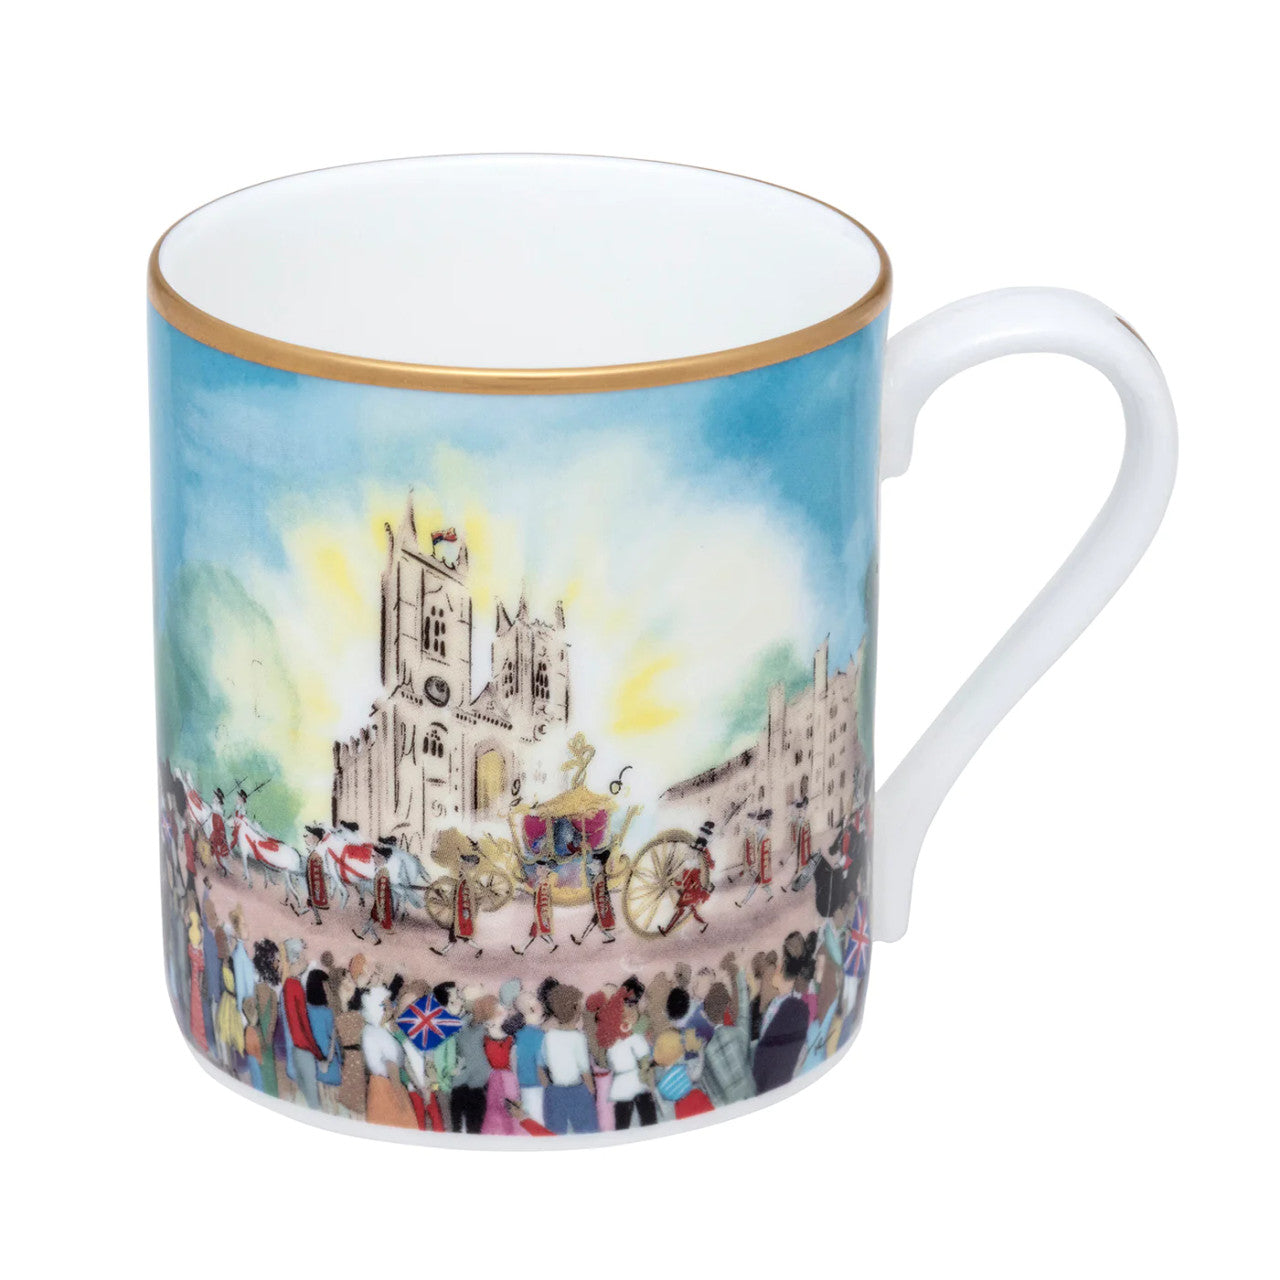 The Coronation at Westminster Abbey Bone China Mug by Halcyon Days. Made in England.